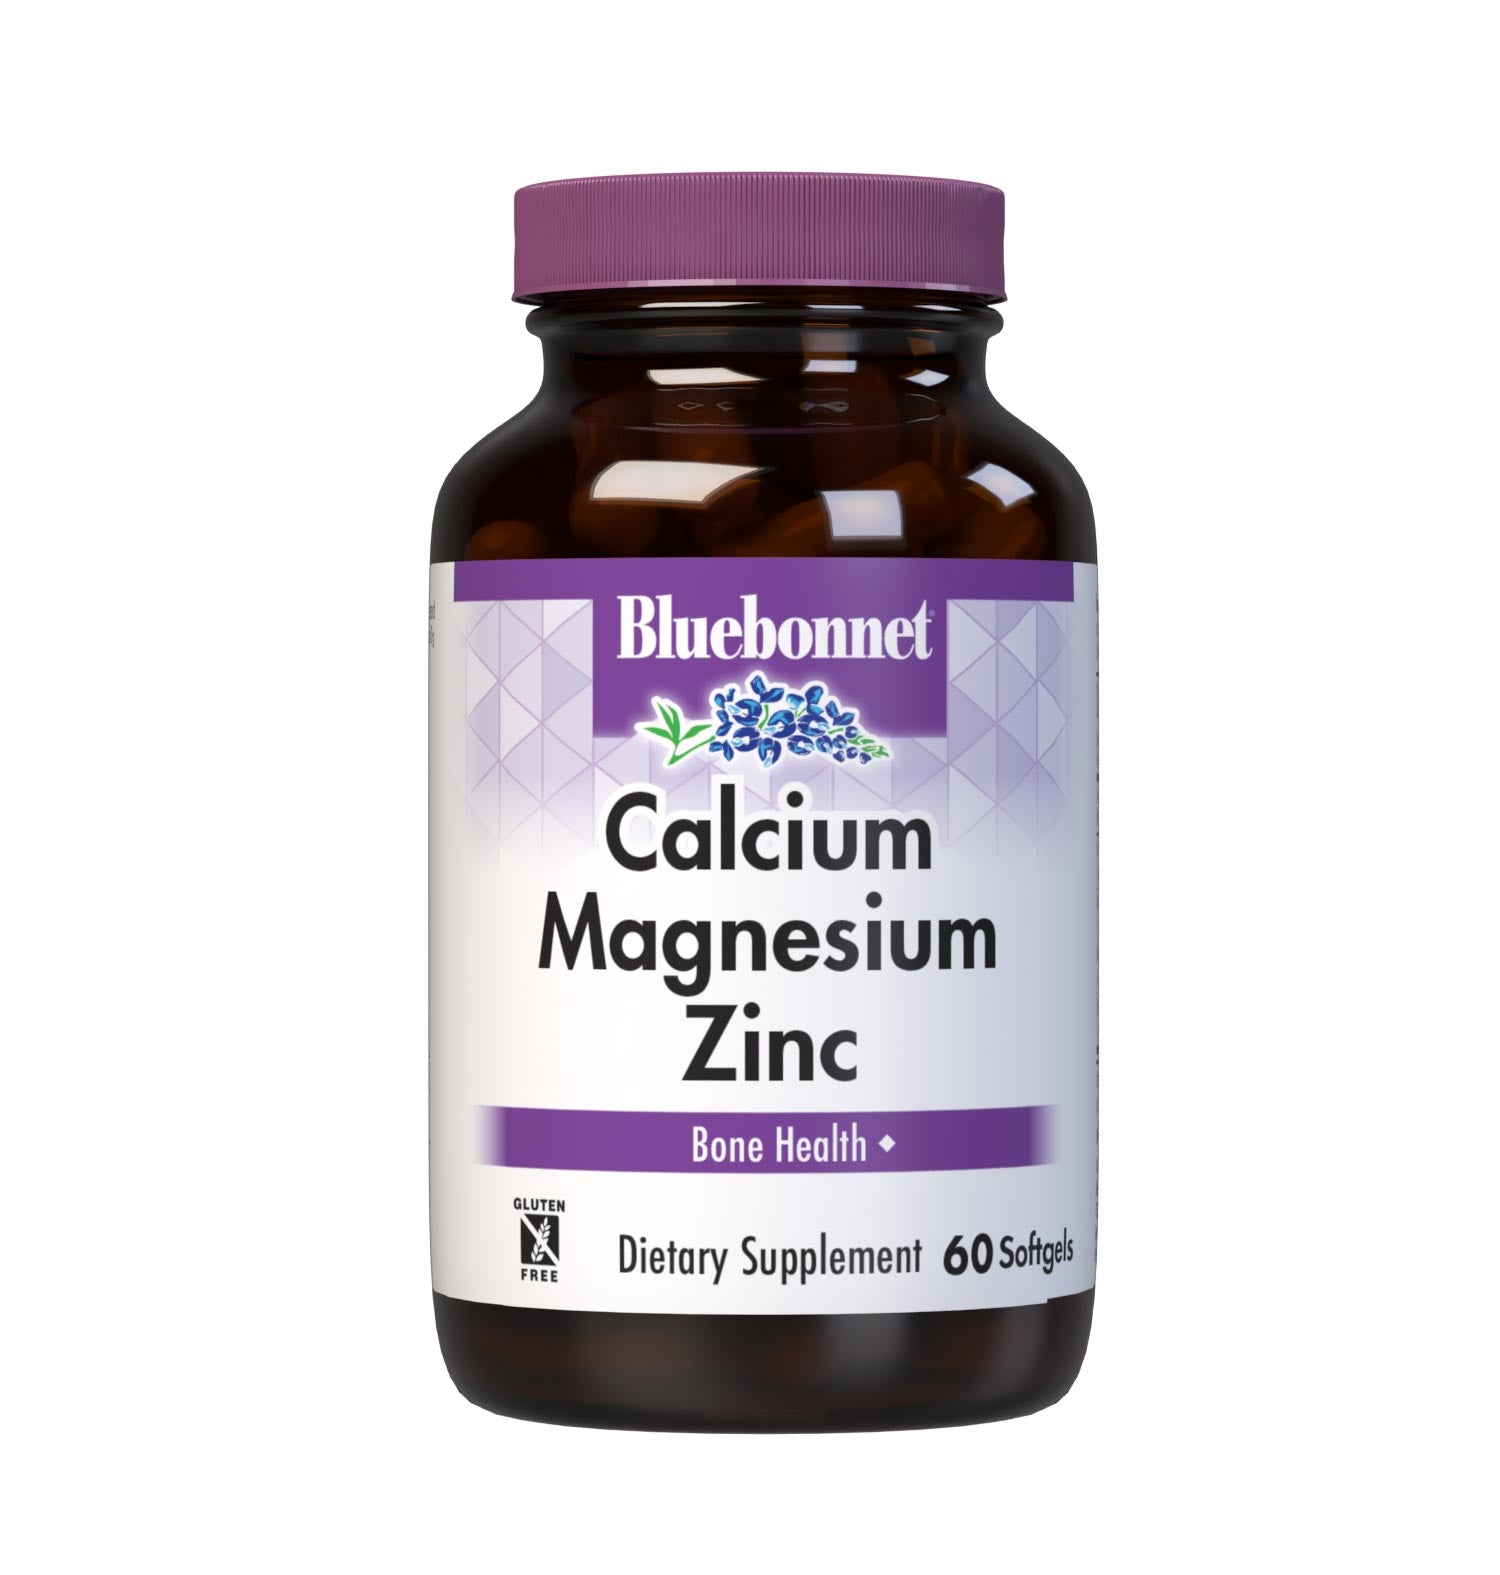 Bluebonnet's Calcium Magnesium Zinc 60 Softgels are formulated with a combination of calcium, magnesium, zinc high potency combination of calcium, magnesium, zinc, and vitamin D3 (cholecalciferol) from lanolin for strong, healthy bones. #size_60 count